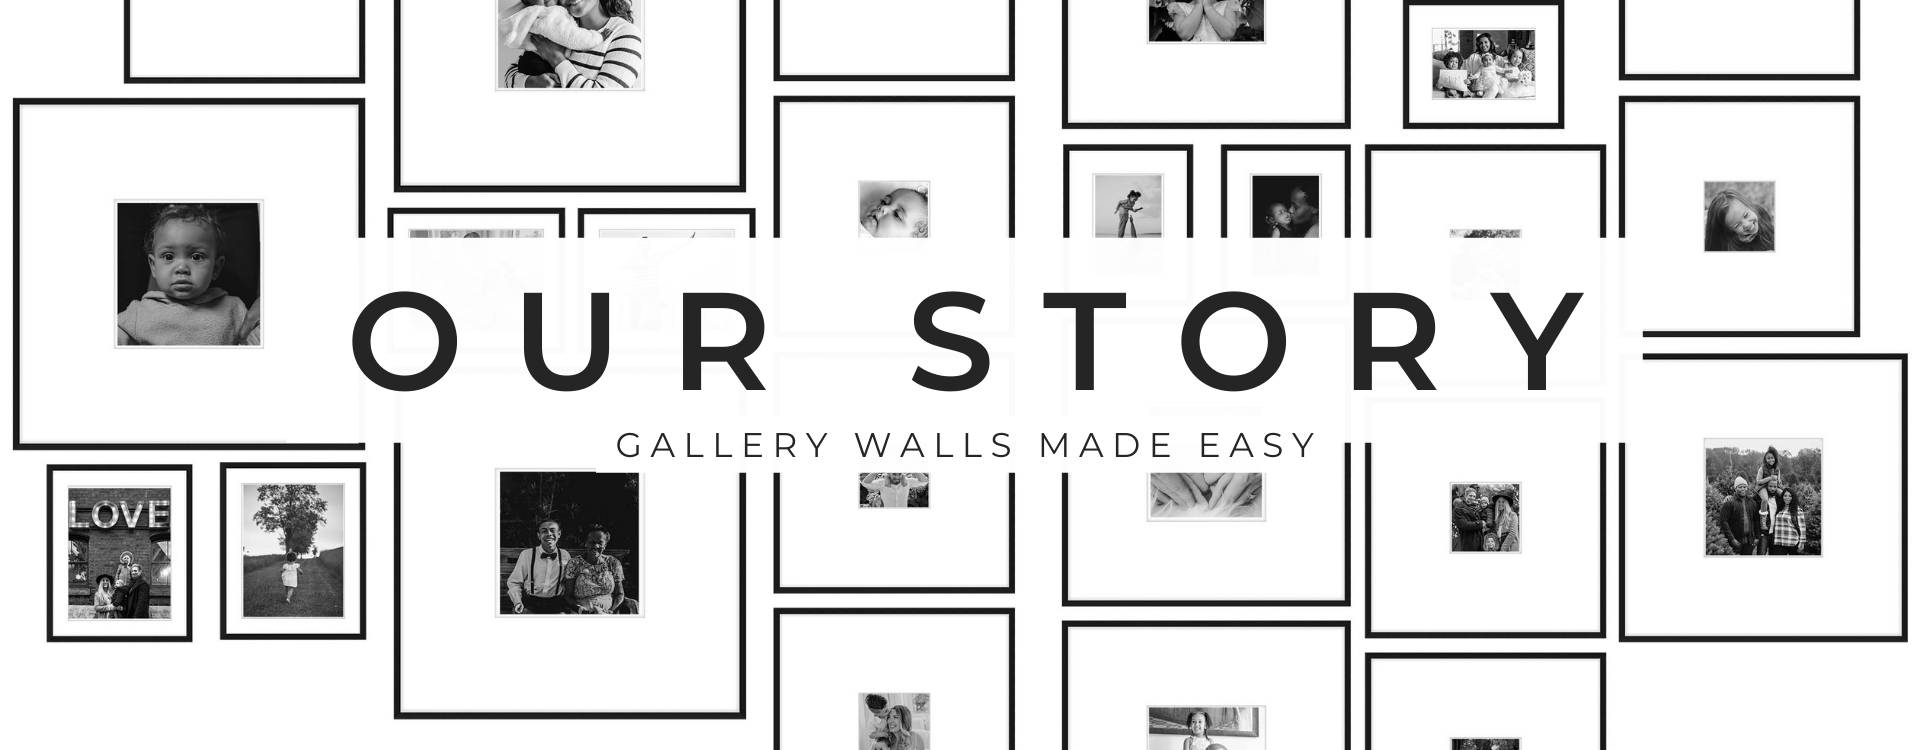 Gallery Walls Made Easy - Our Story